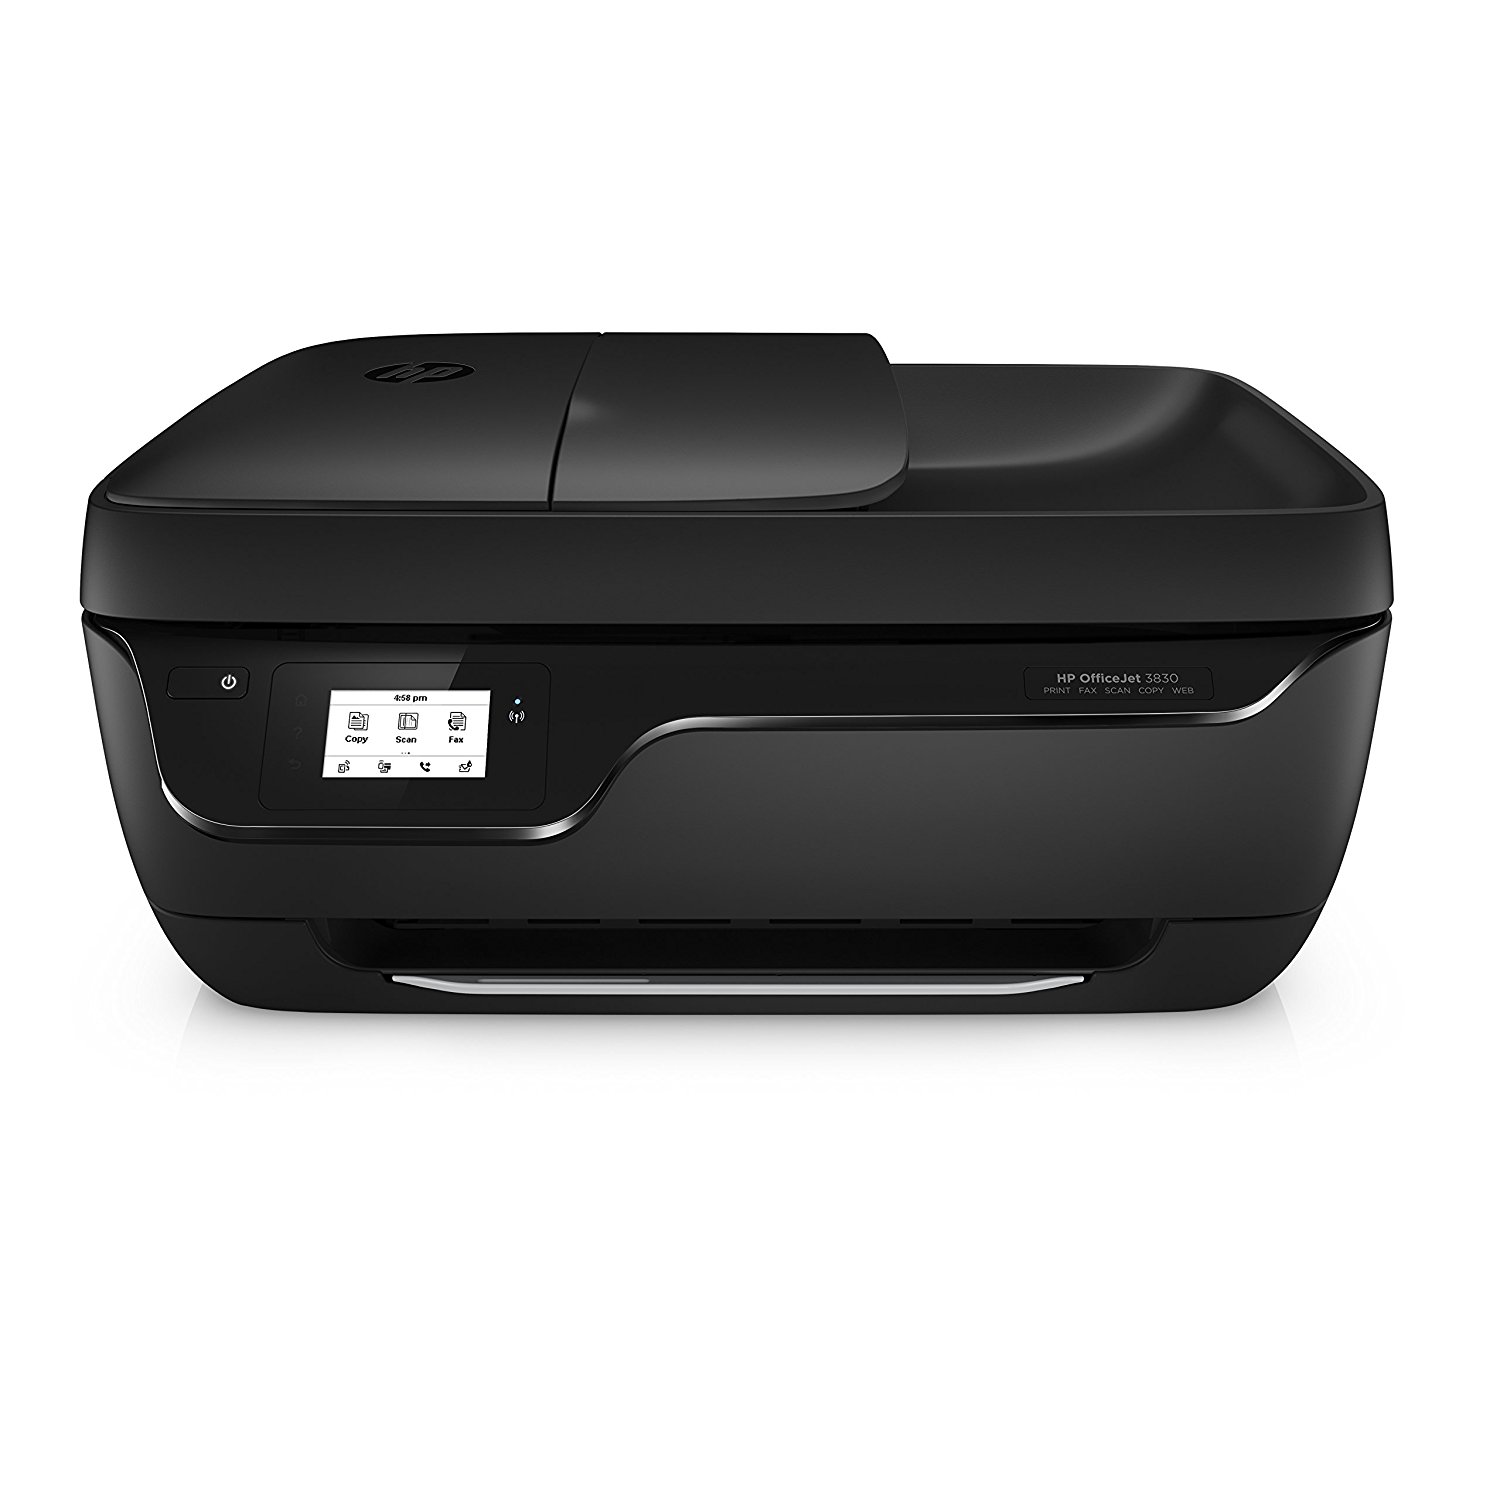 HP OfficeJet 3830 Wireless All-in-One Photo Printer wit...